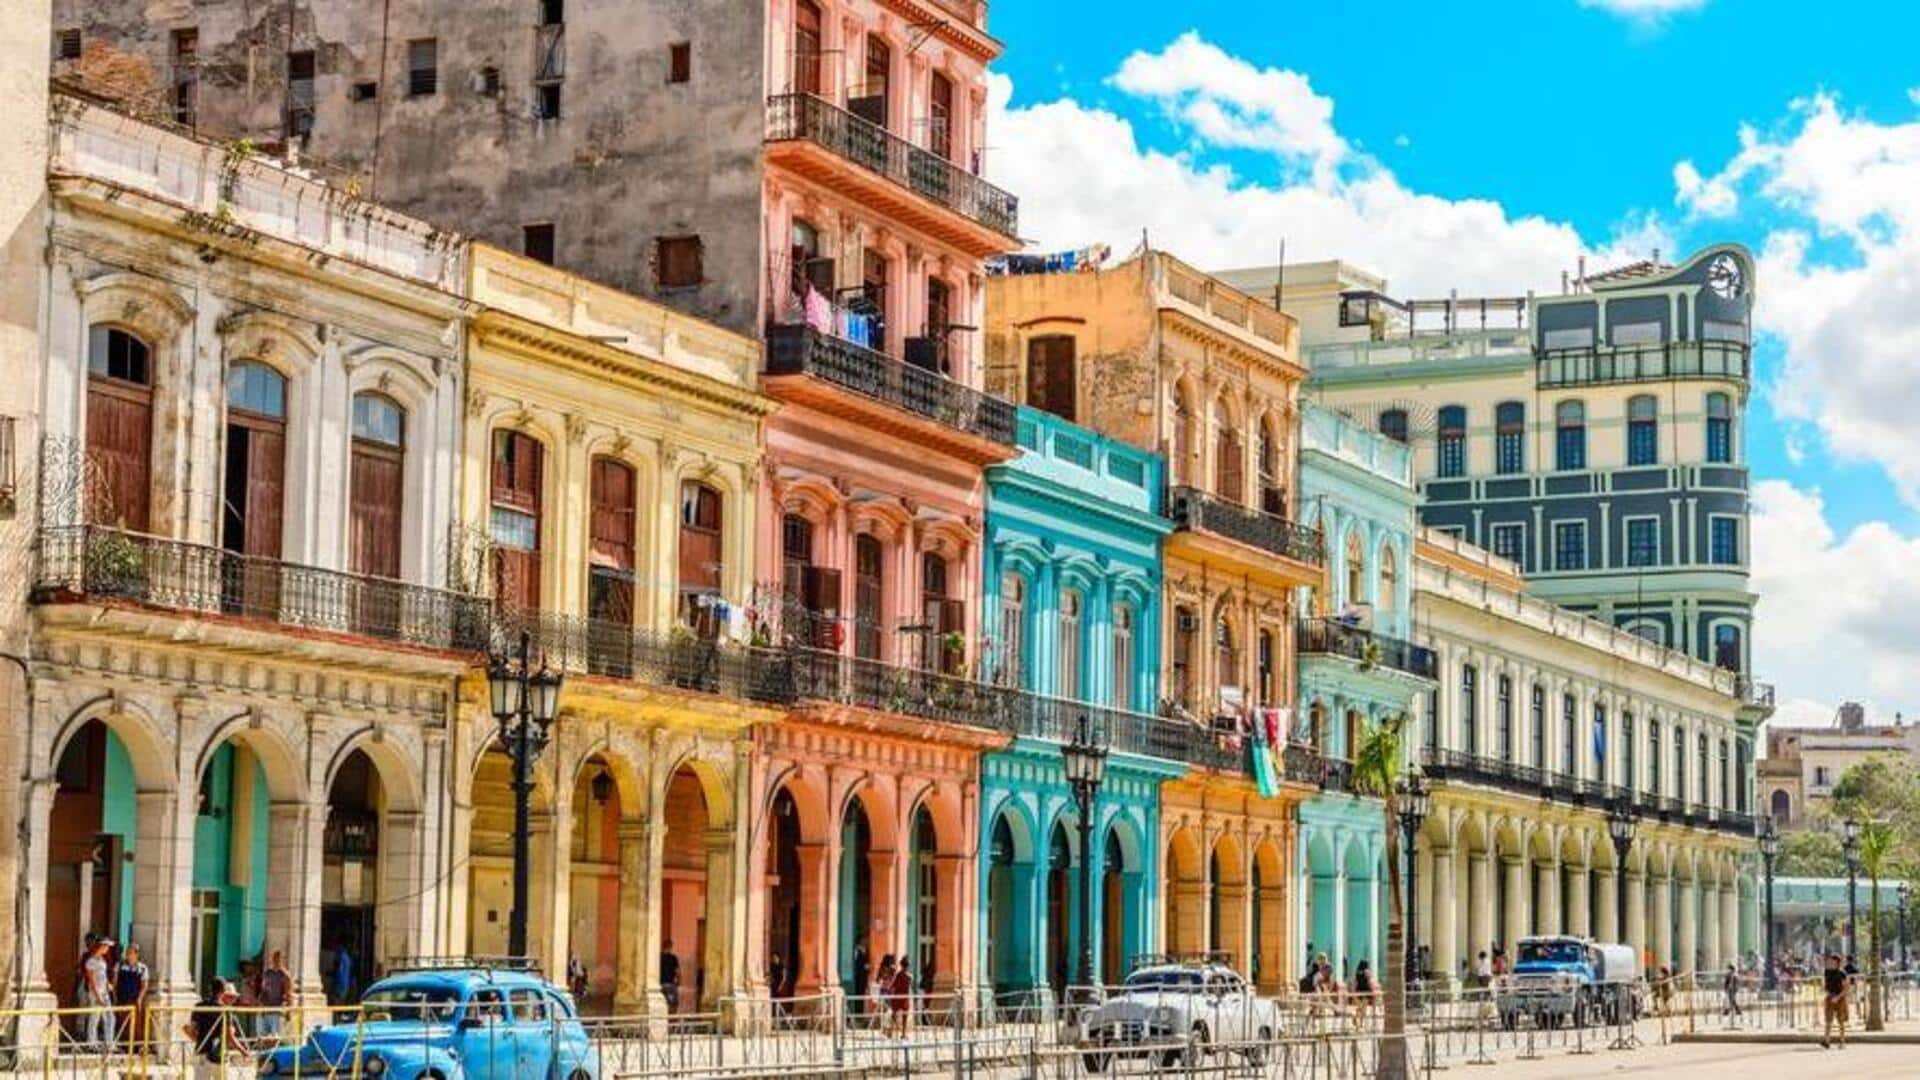 Exploring Havana's Afro-Cuban soul with this travel guide